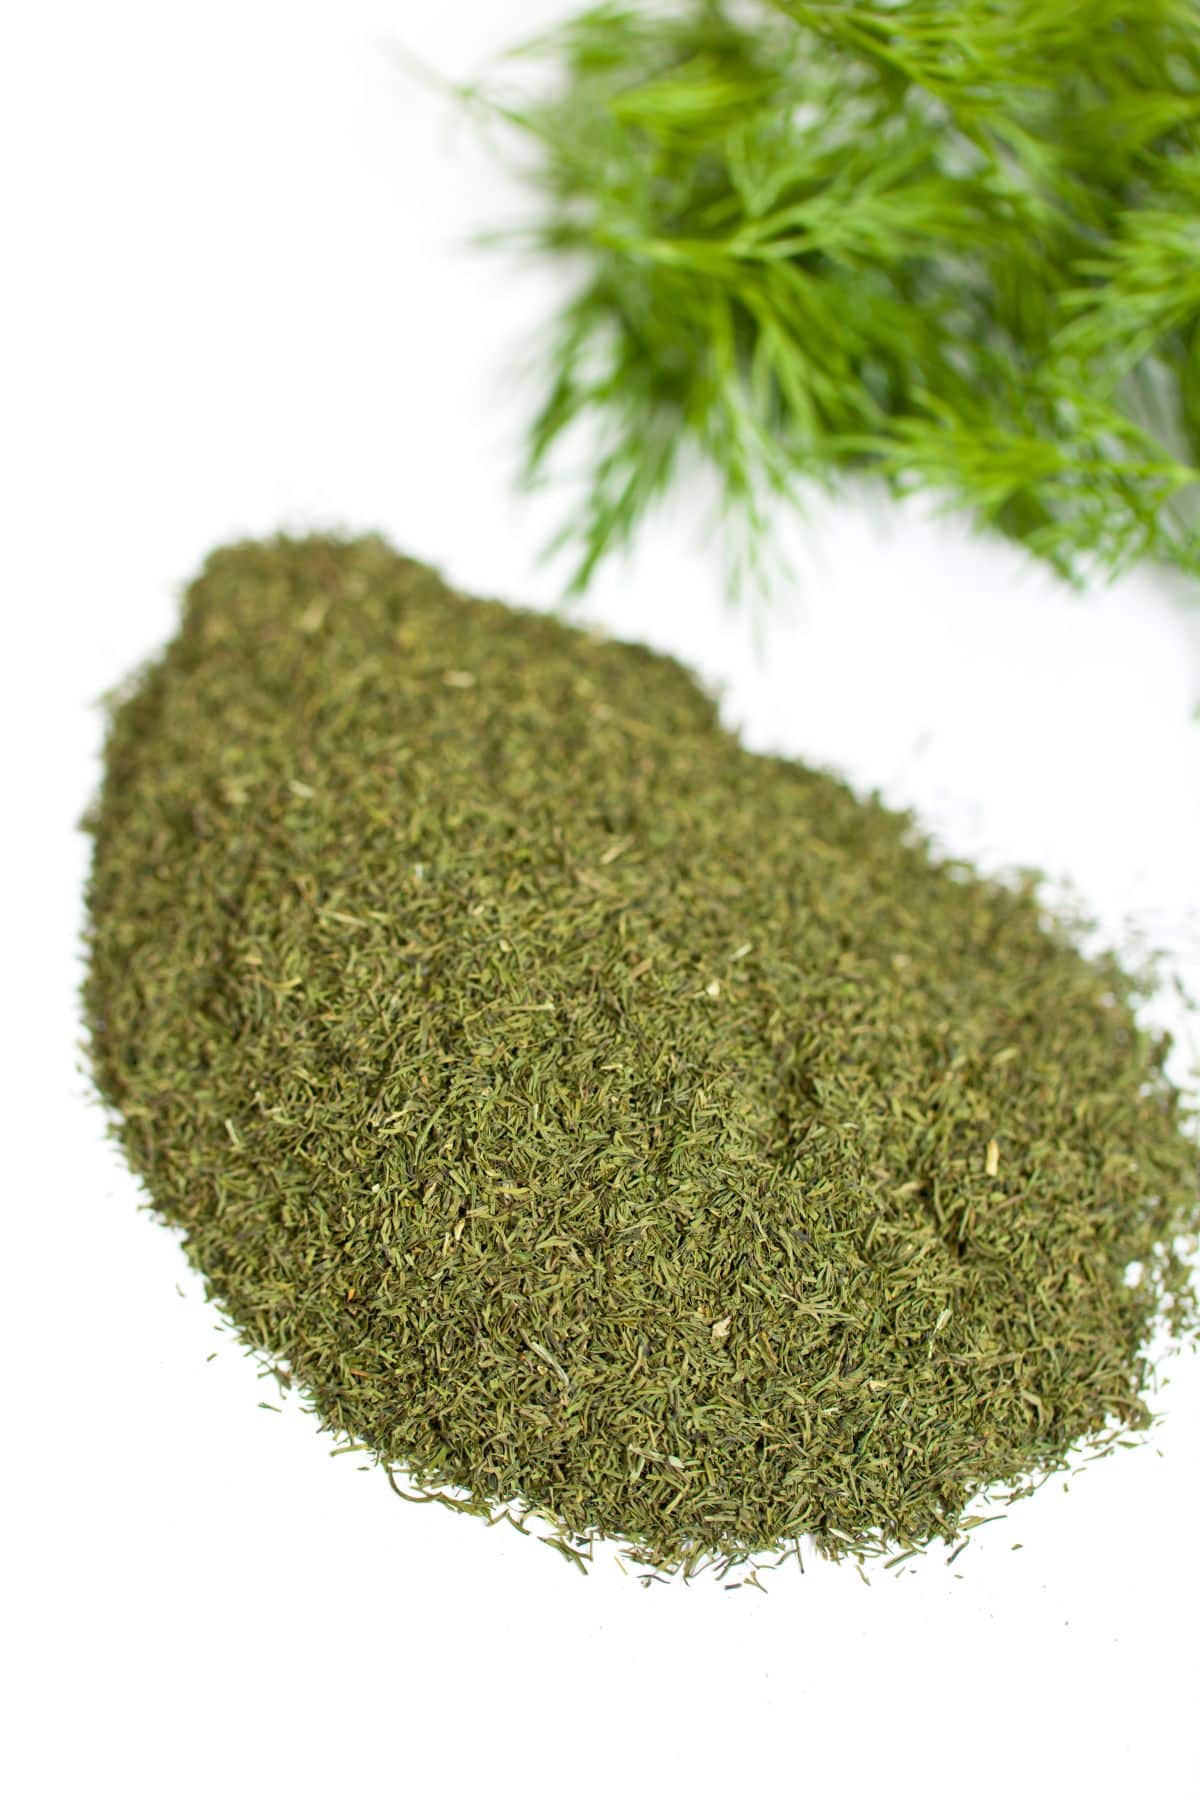 Mound of dried dill spices beside fresh dill leaves.